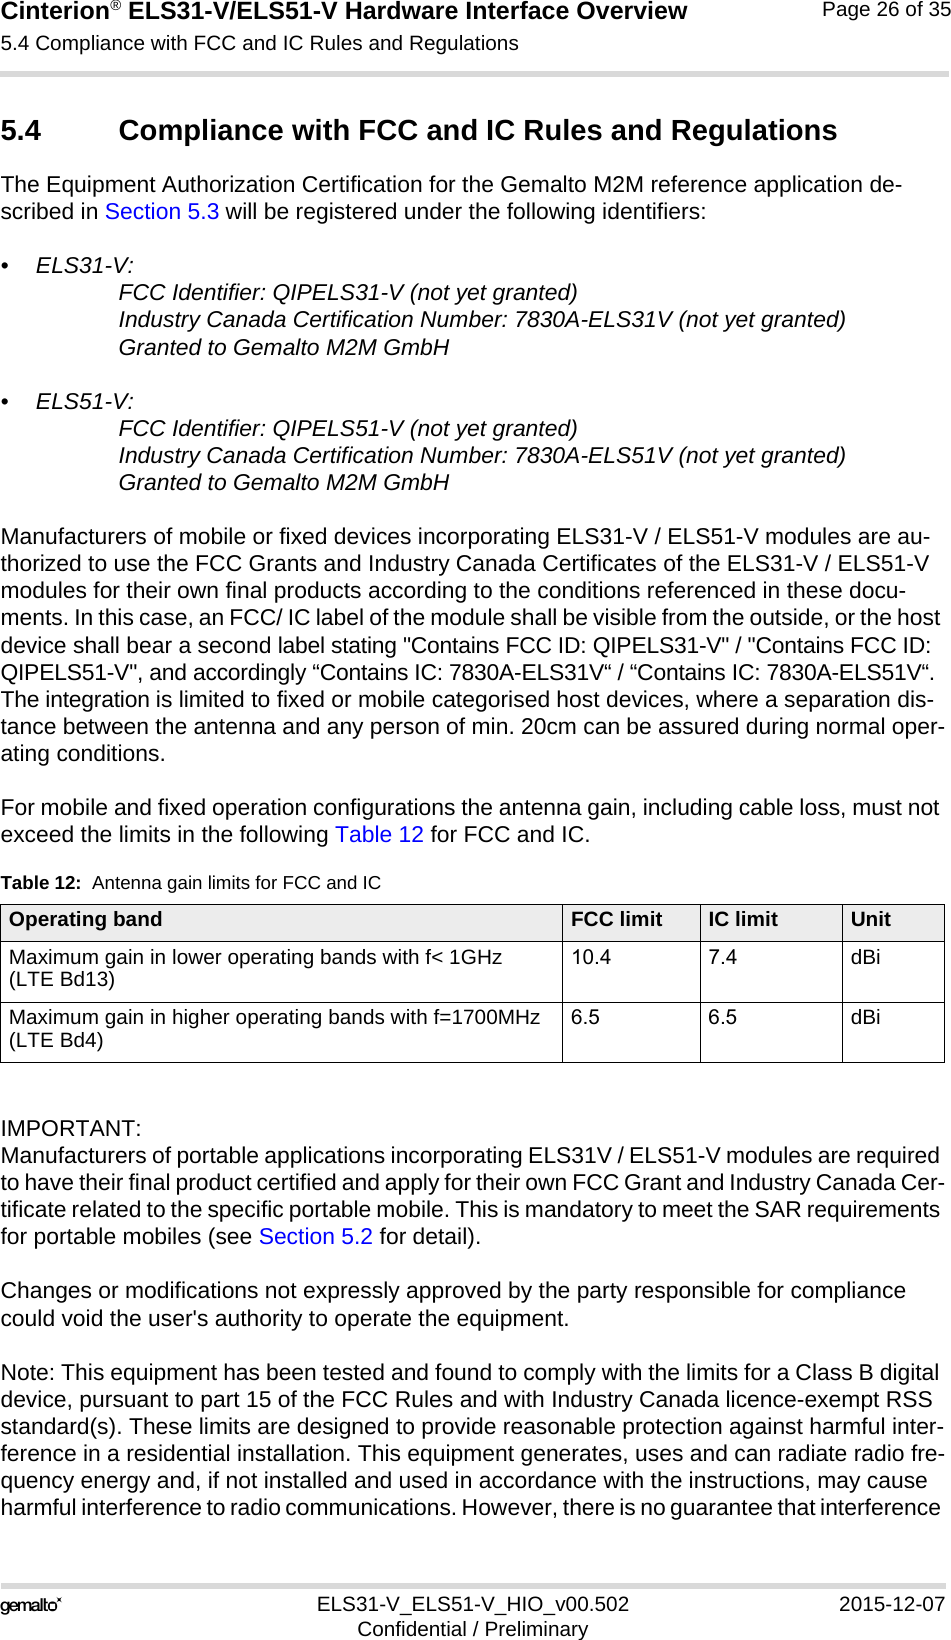 Cinterion® ELS31-V/ELS51-V Hardware Interface Overview5.4 Compliance with FCC and IC Rules and Regulations27ELS31-V_ELS51-V_HIO_v00.502 2015-12-07Confidential / PreliminaryPage 26 of 355.4 Compliance with FCC and IC Rules and RegulationsThe Equipment Authorization Certification for the Gemalto M2M reference application de-scribed in Section 5.3 will be registered under the following identifiers:• ELS31-V:FCC Identifier: QIPELS31-V (not yet granted)Industry Canada Certification Number: 7830A-ELS31V (not yet granted)Granted to Gemalto M2M GmbH • ELS51-V:FCC Identifier: QIPELS51-V (not yet granted)Industry Canada Certification Number: 7830A-ELS51V (not yet granted)Granted to Gemalto M2M GmbH Manufacturers of mobile or fixed devices incorporating ELS31-V / ELS51-V modules are au-thorized to use the FCC Grants and Industry Canada Certificates of the ELS31-V / ELS51-V modules for their own final products according to the conditions referenced in these docu-ments. In this case, an FCC/ IC label of the module shall be visible from the outside, or the host device shall bear a second label stating &quot;Contains FCC ID: QIPELS31-V&quot; / &quot;Contains FCC ID: QIPELS51-V&quot;, and accordingly “Contains IC: 7830A-ELS31V“ / “Contains IC: 7830A-ELS51V“. The integration is limited to fixed or mobile categorised host devices, where a separation dis-tance between the antenna and any person of min. 20cm can be assured during normal oper-ating conditions.For mobile and fixed operation configurations the antenna gain, including cable loss, must not exceed the limits in the following Table 12 for FCC and IC.IMPORTANT: Manufacturers of portable applications incorporating ELS31V / ELS51-V modules are required to have their final product certified and apply for their own FCC Grant and Industry Canada Cer-tificate related to the specific portable mobile. This is mandatory to meet the SAR requirements for portable mobiles (see Section 5.2 for detail).Changes or modifications not expressly approved by the party responsible for compliance could void the user&apos;s authority to operate the equipment.Note: This equipment has been tested and found to comply with the limits for a Class B digital device, pursuant to part 15 of the FCC Rules and with Industry Canada licence-exempt RSS standard(s). These limits are designed to provide reasonable protection against harmful inter-ference in a residential installation. This equipment generates, uses and can radiate radio fre-quency energy and, if not installed and used in accordance with the instructions, may cause harmful interference to radio communications. However, there is no guarantee that interference Table 12:  Antenna gain limits for FCC and ICOperating band FCC limit IC limit UnitMaximum gain in lower operating bands with f&lt; 1GHz(LTE Bd13)10.4 7.4 dBiMaximum gain in higher operating bands with f=1700MHz(LTE Bd4)6.5 6.5 dBi